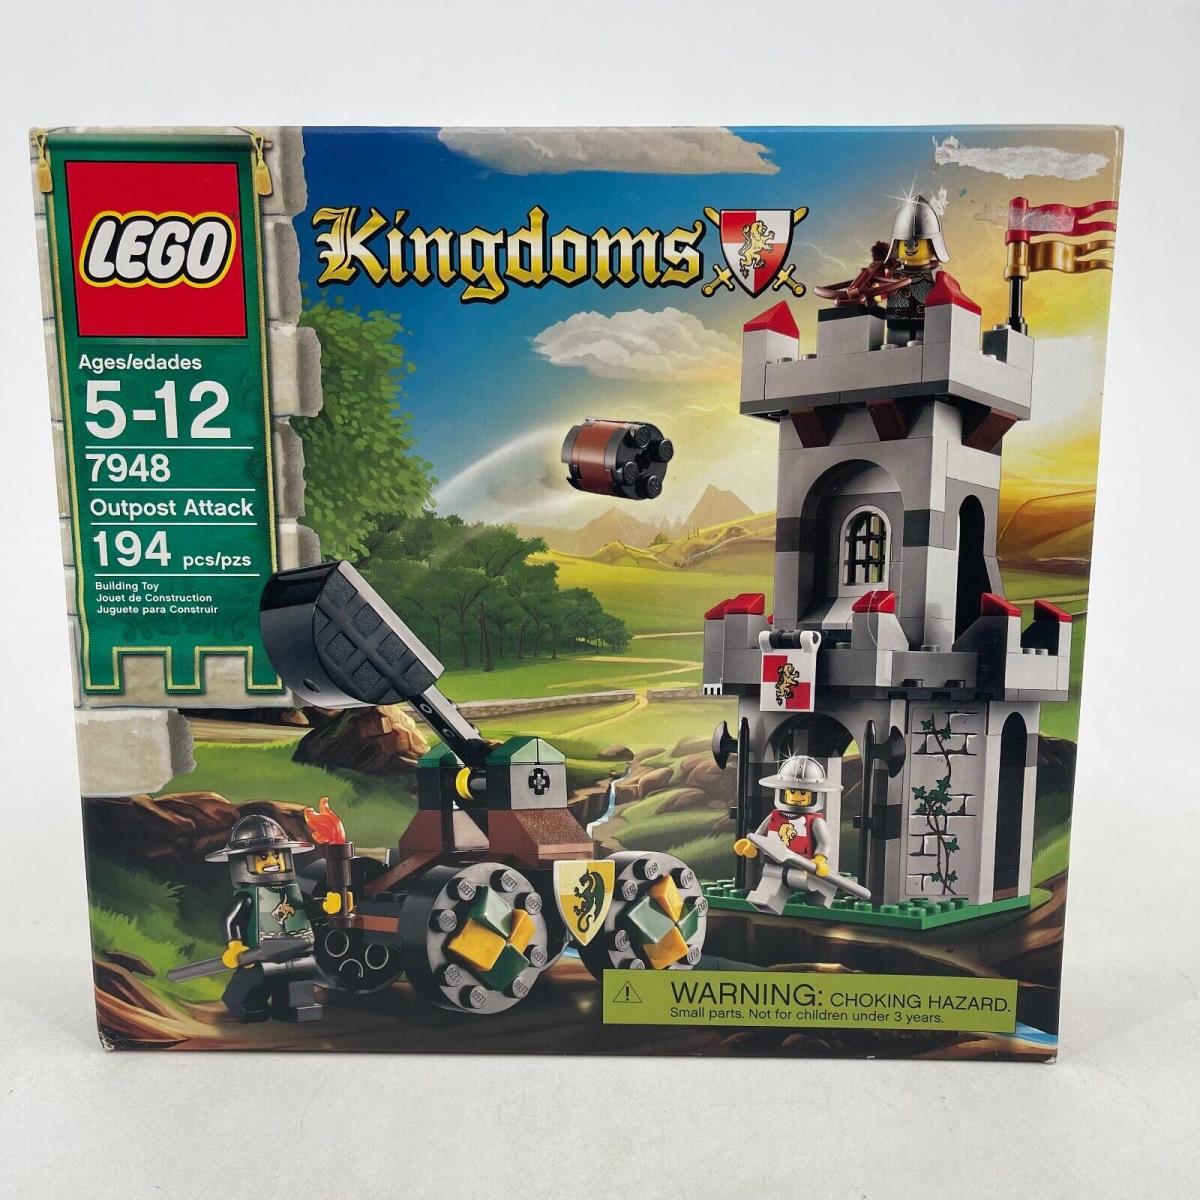 Lego Kingdoms 7948 Outpost Attack 194 Pieces Ages 5-12